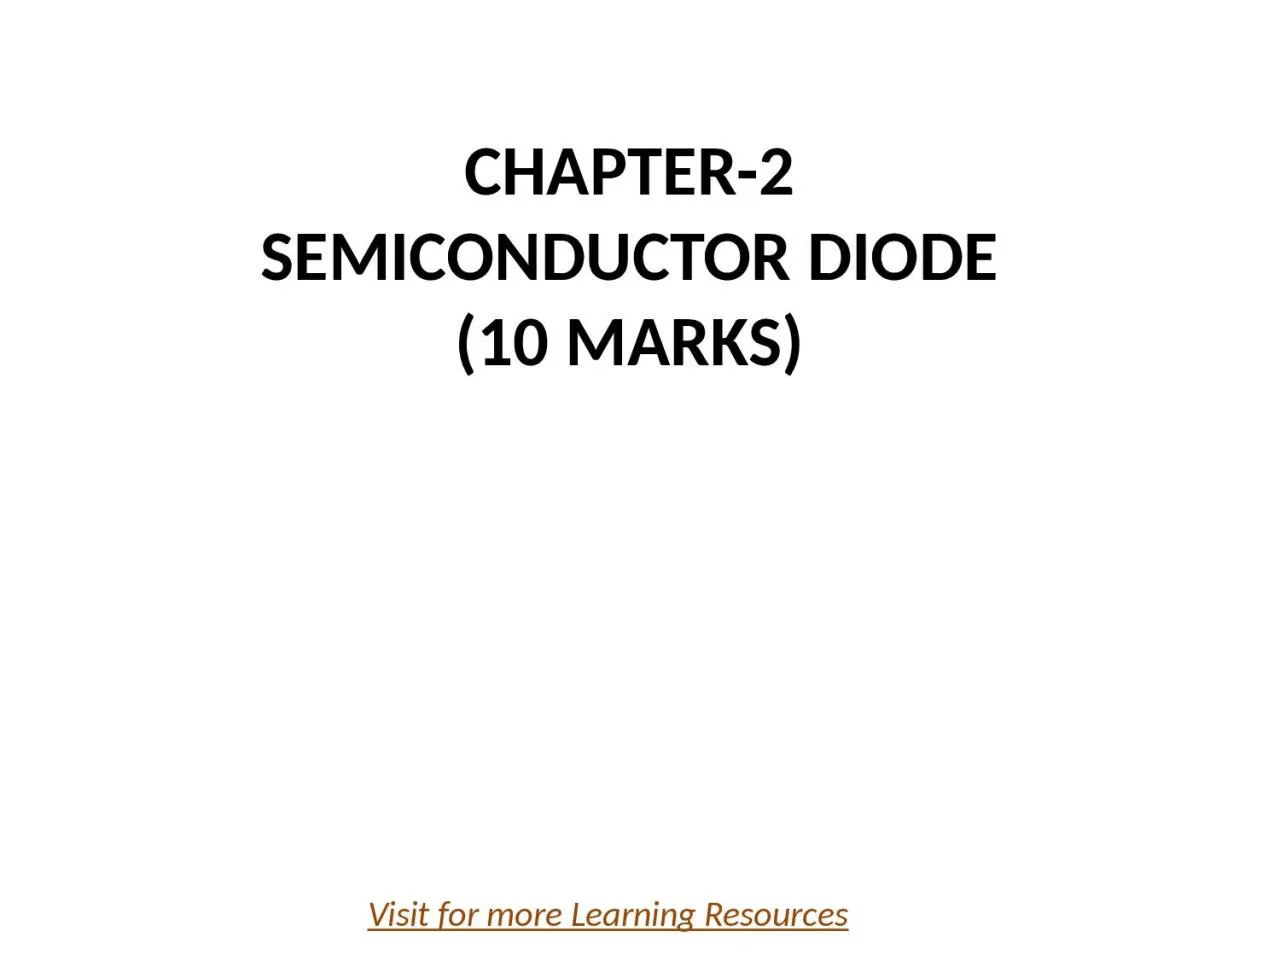 CHAPTER-2 SEMICONDUCTOR DIODE